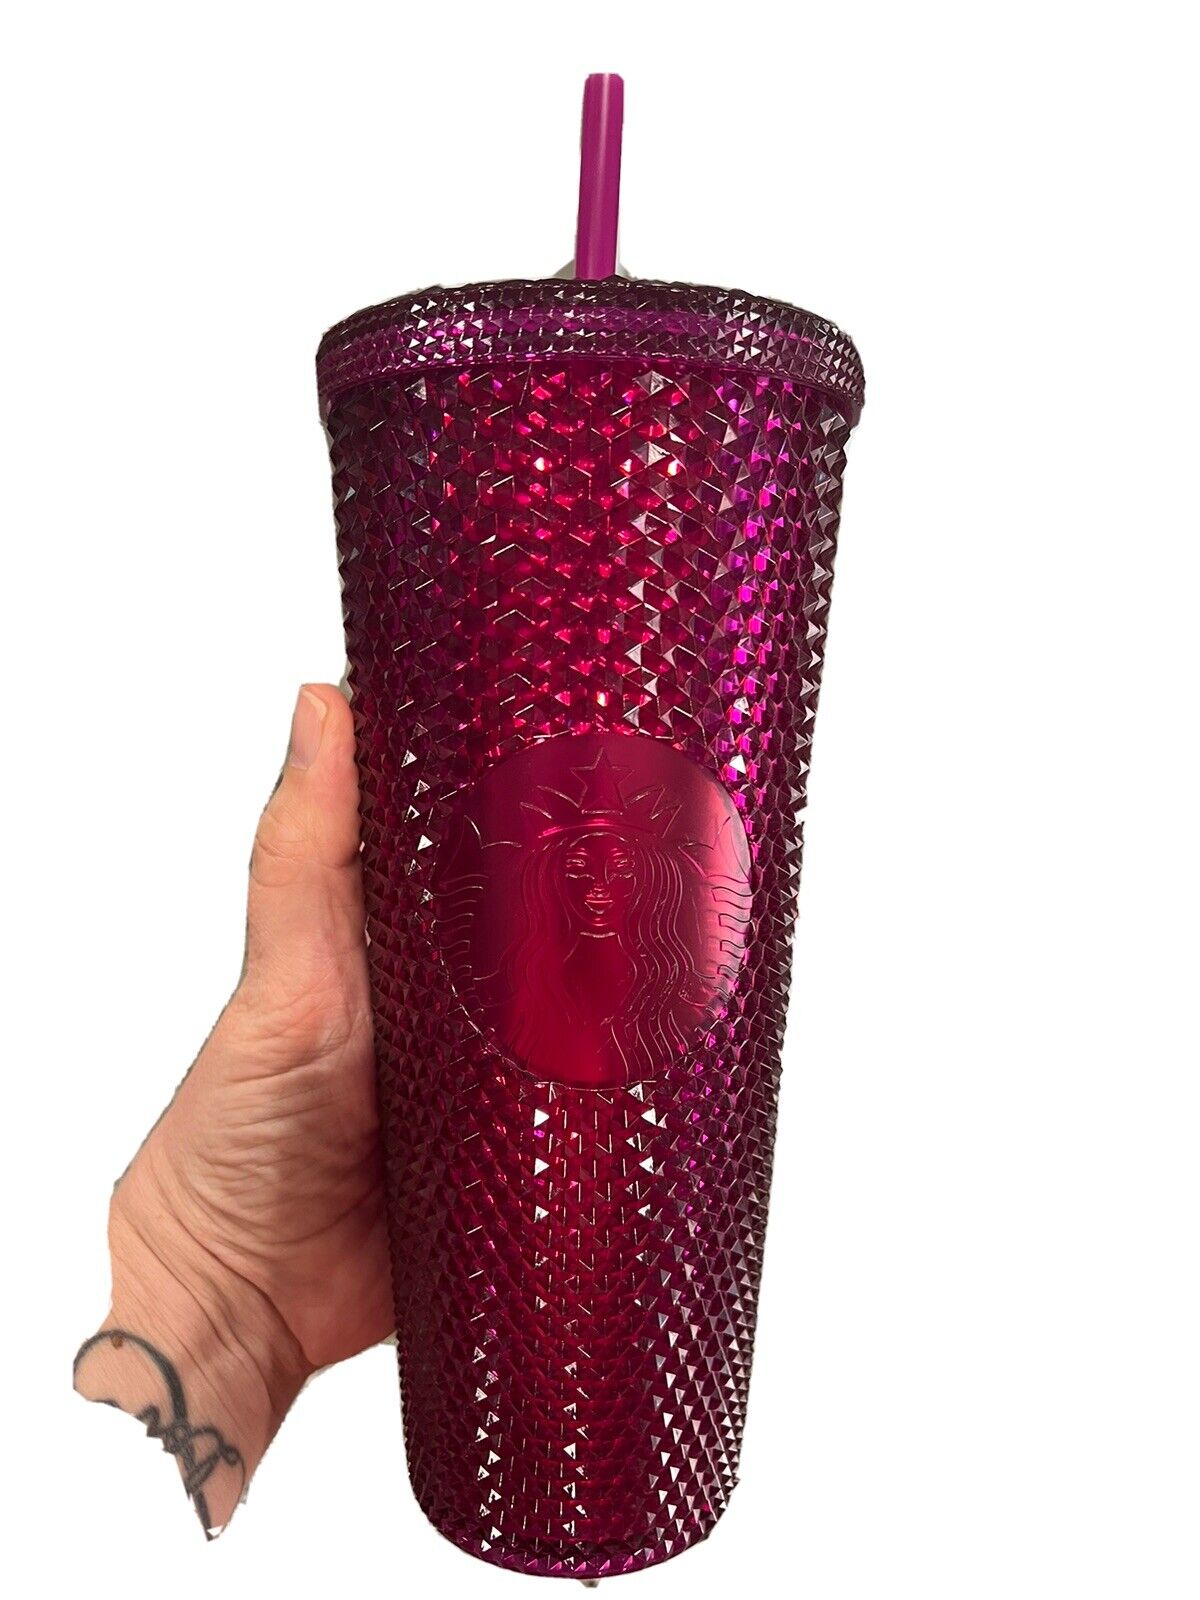 NEW Starbucks Raspberry Soft Touch Studded Tumbler Venti 24Oz Cold Cup 2023